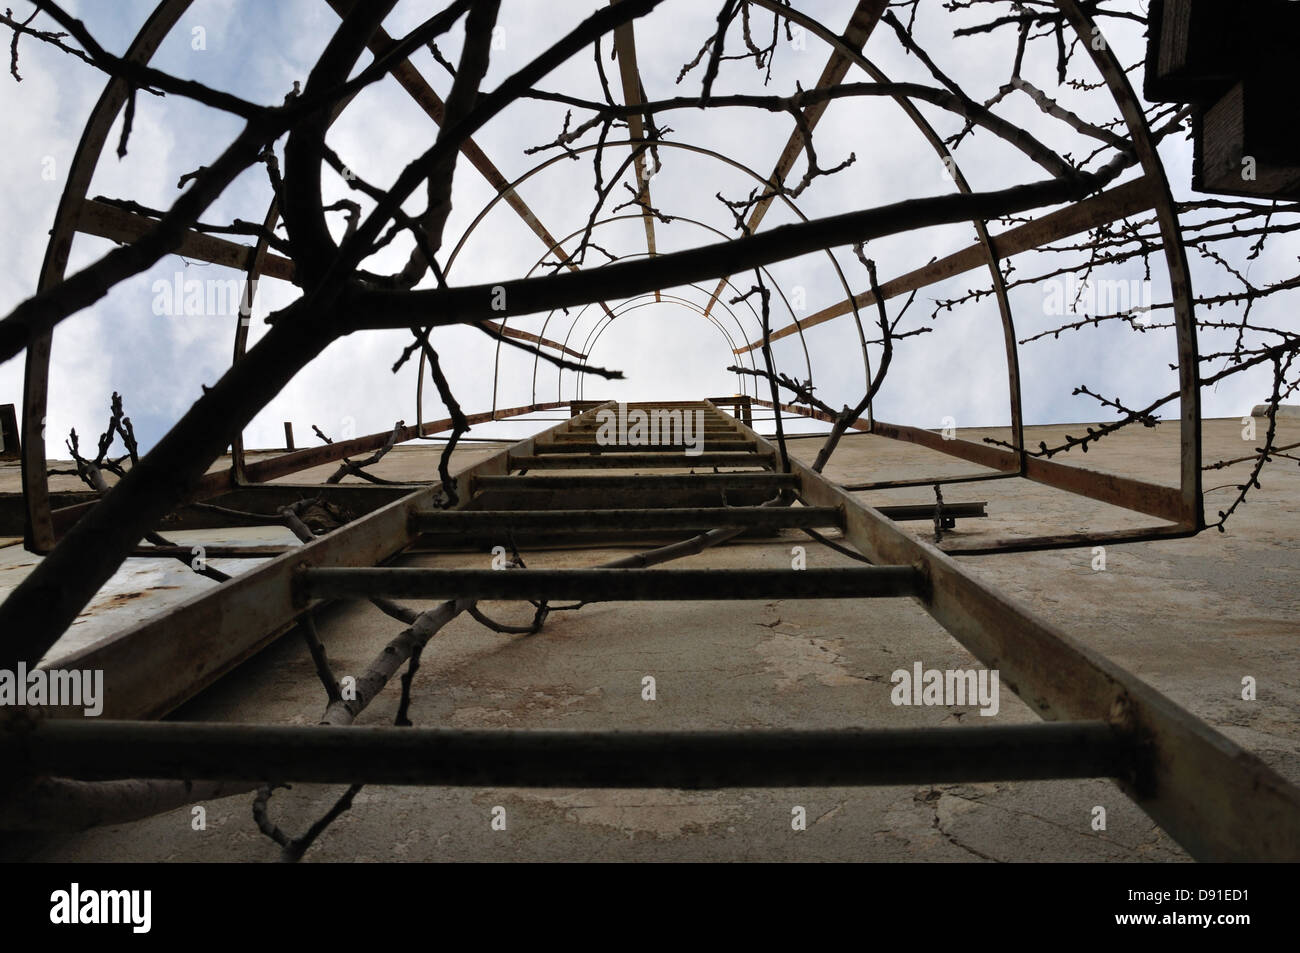 Tree branches tangled around rusty wall mounted iron ladder with safety railing. Stock Photo